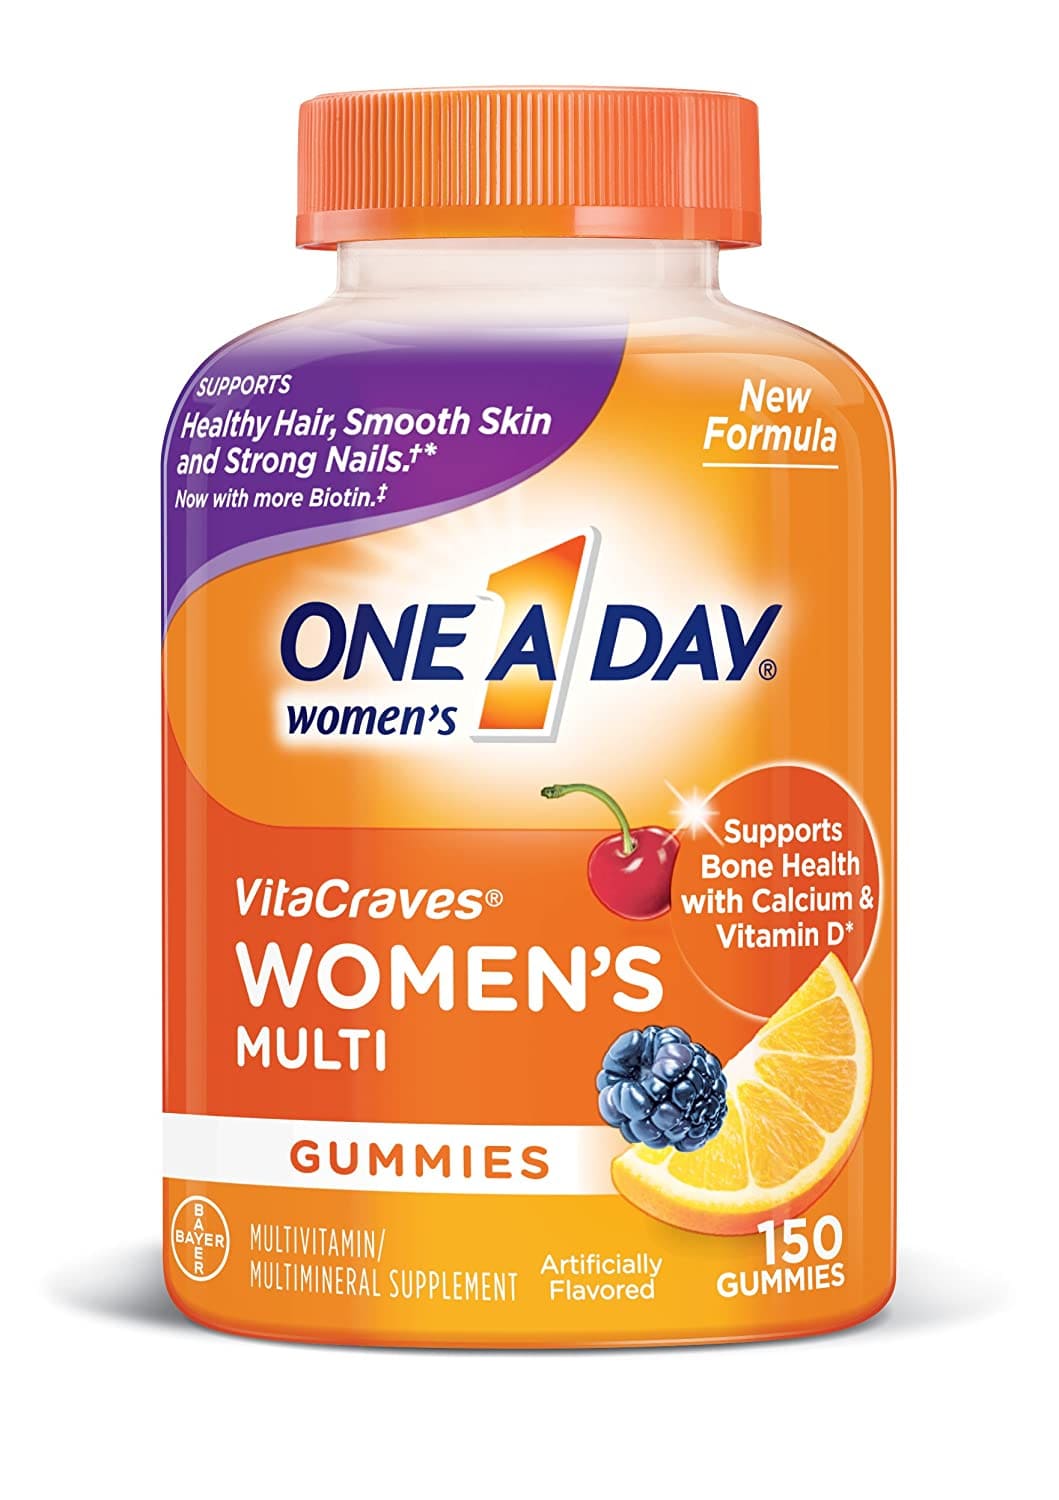 One A Day Women's Vitacraves Multivitamin